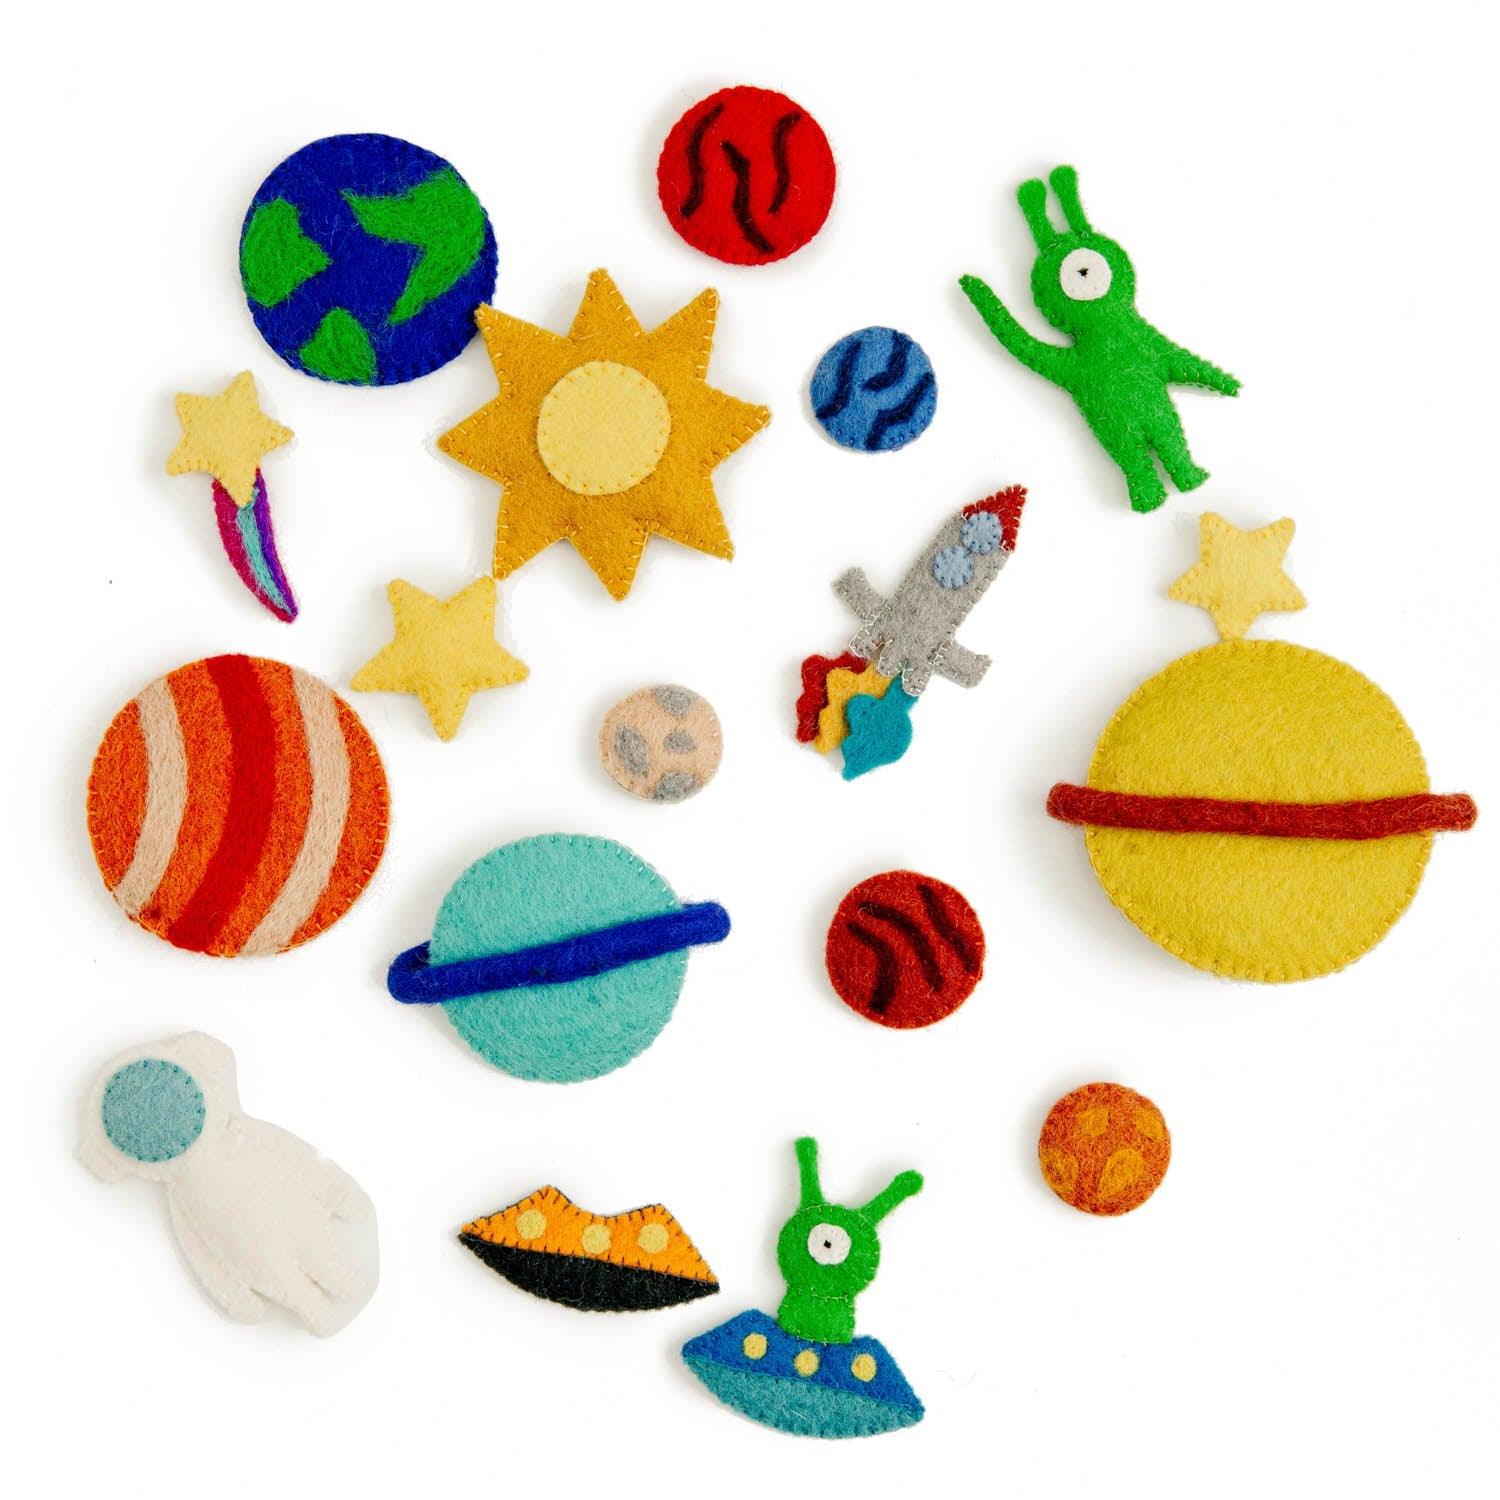 Felt Space Discovery Board - Why and Whale